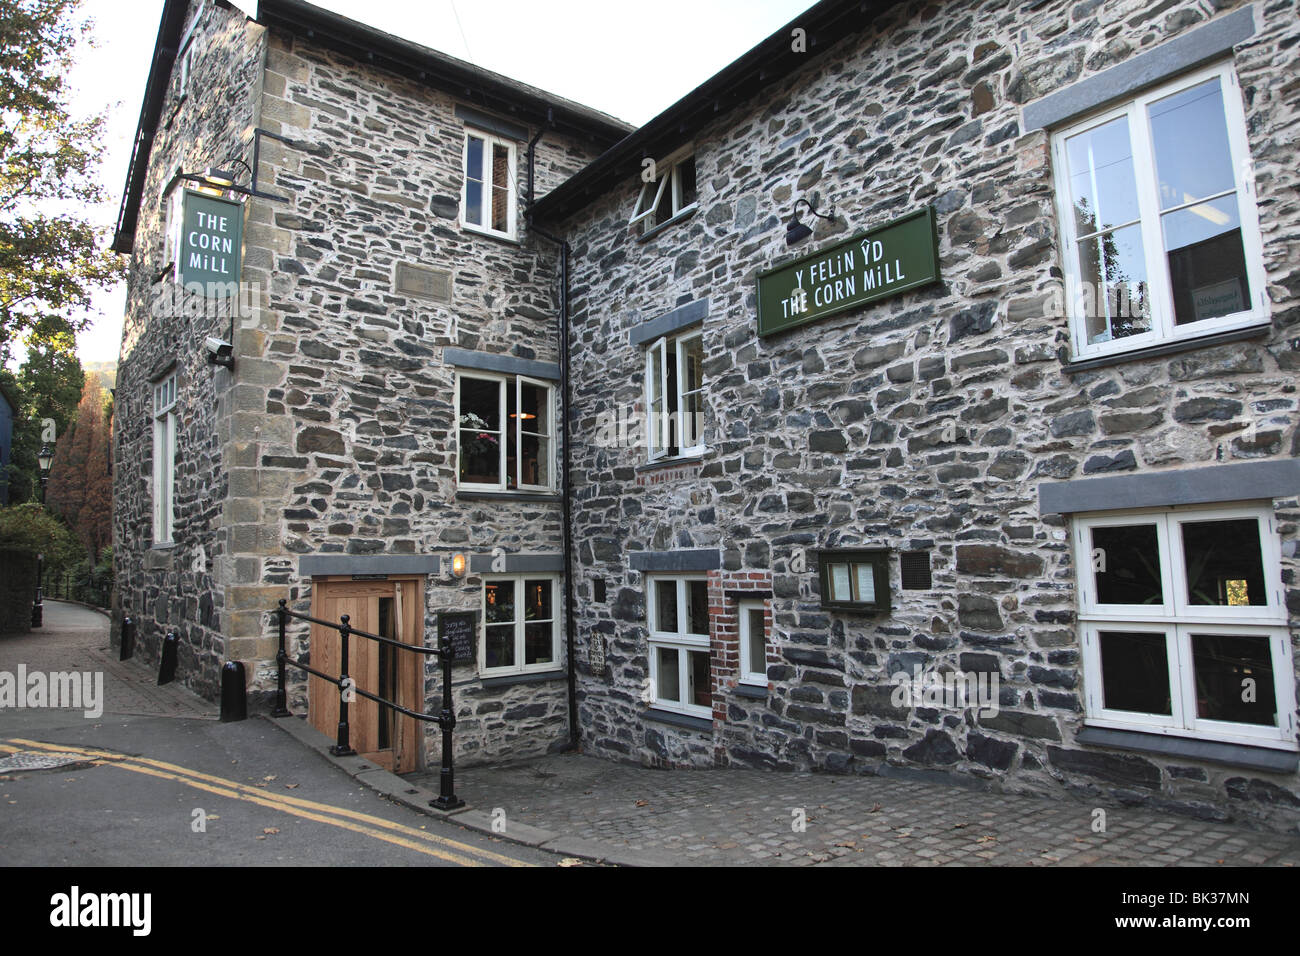 The Corn Mill pub and restaurant which overlooks the river Dee, Llangollen, North Wales Stock Photo